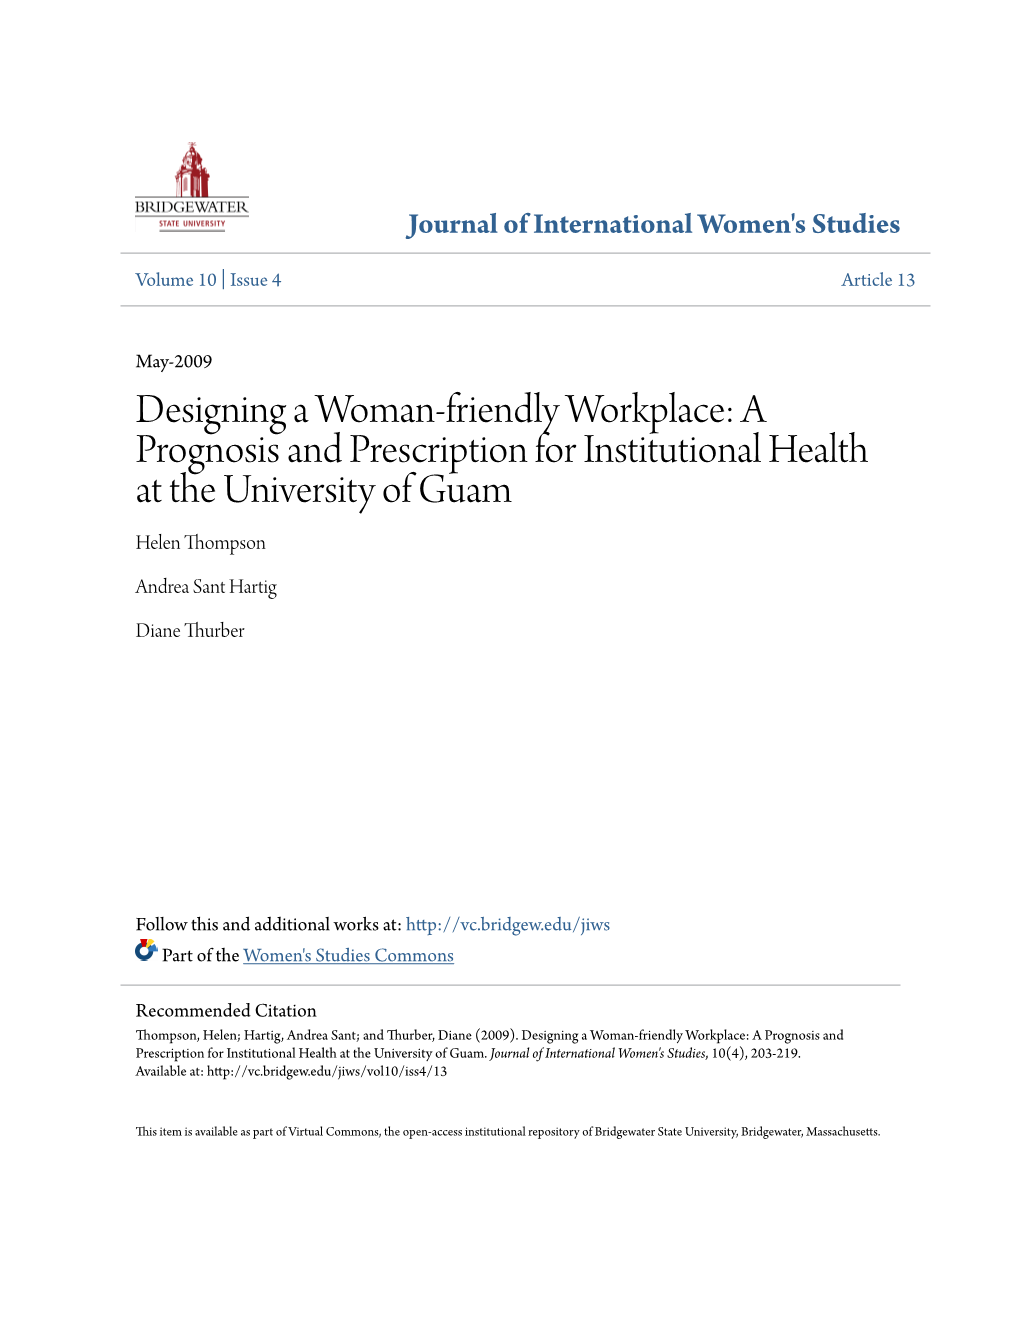 Designing a Woman-Friendly Workplace: a Prognosis and Prescription for Institutional Health at the University of Guam Helen Thompson